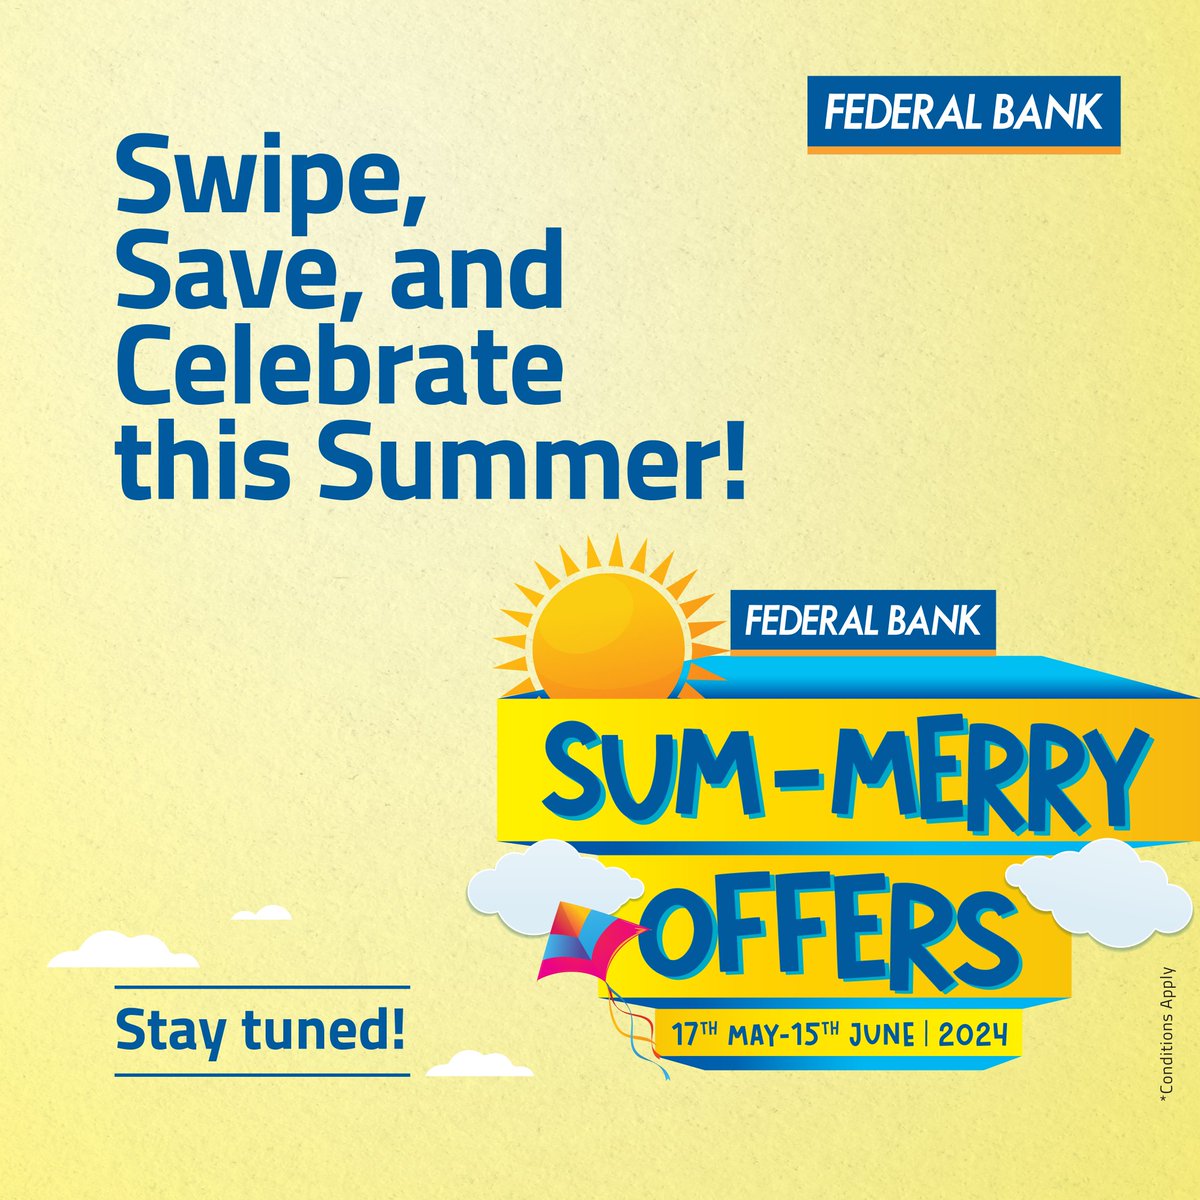 Get ready for exciting summer offers and deals, on Federal Bank Credit Cards, coming your way. Stay tuned and keep an eye out for more details! Visit federalbank.co.in for more information. #SumMerry #Offers #FederalBankCreditCards